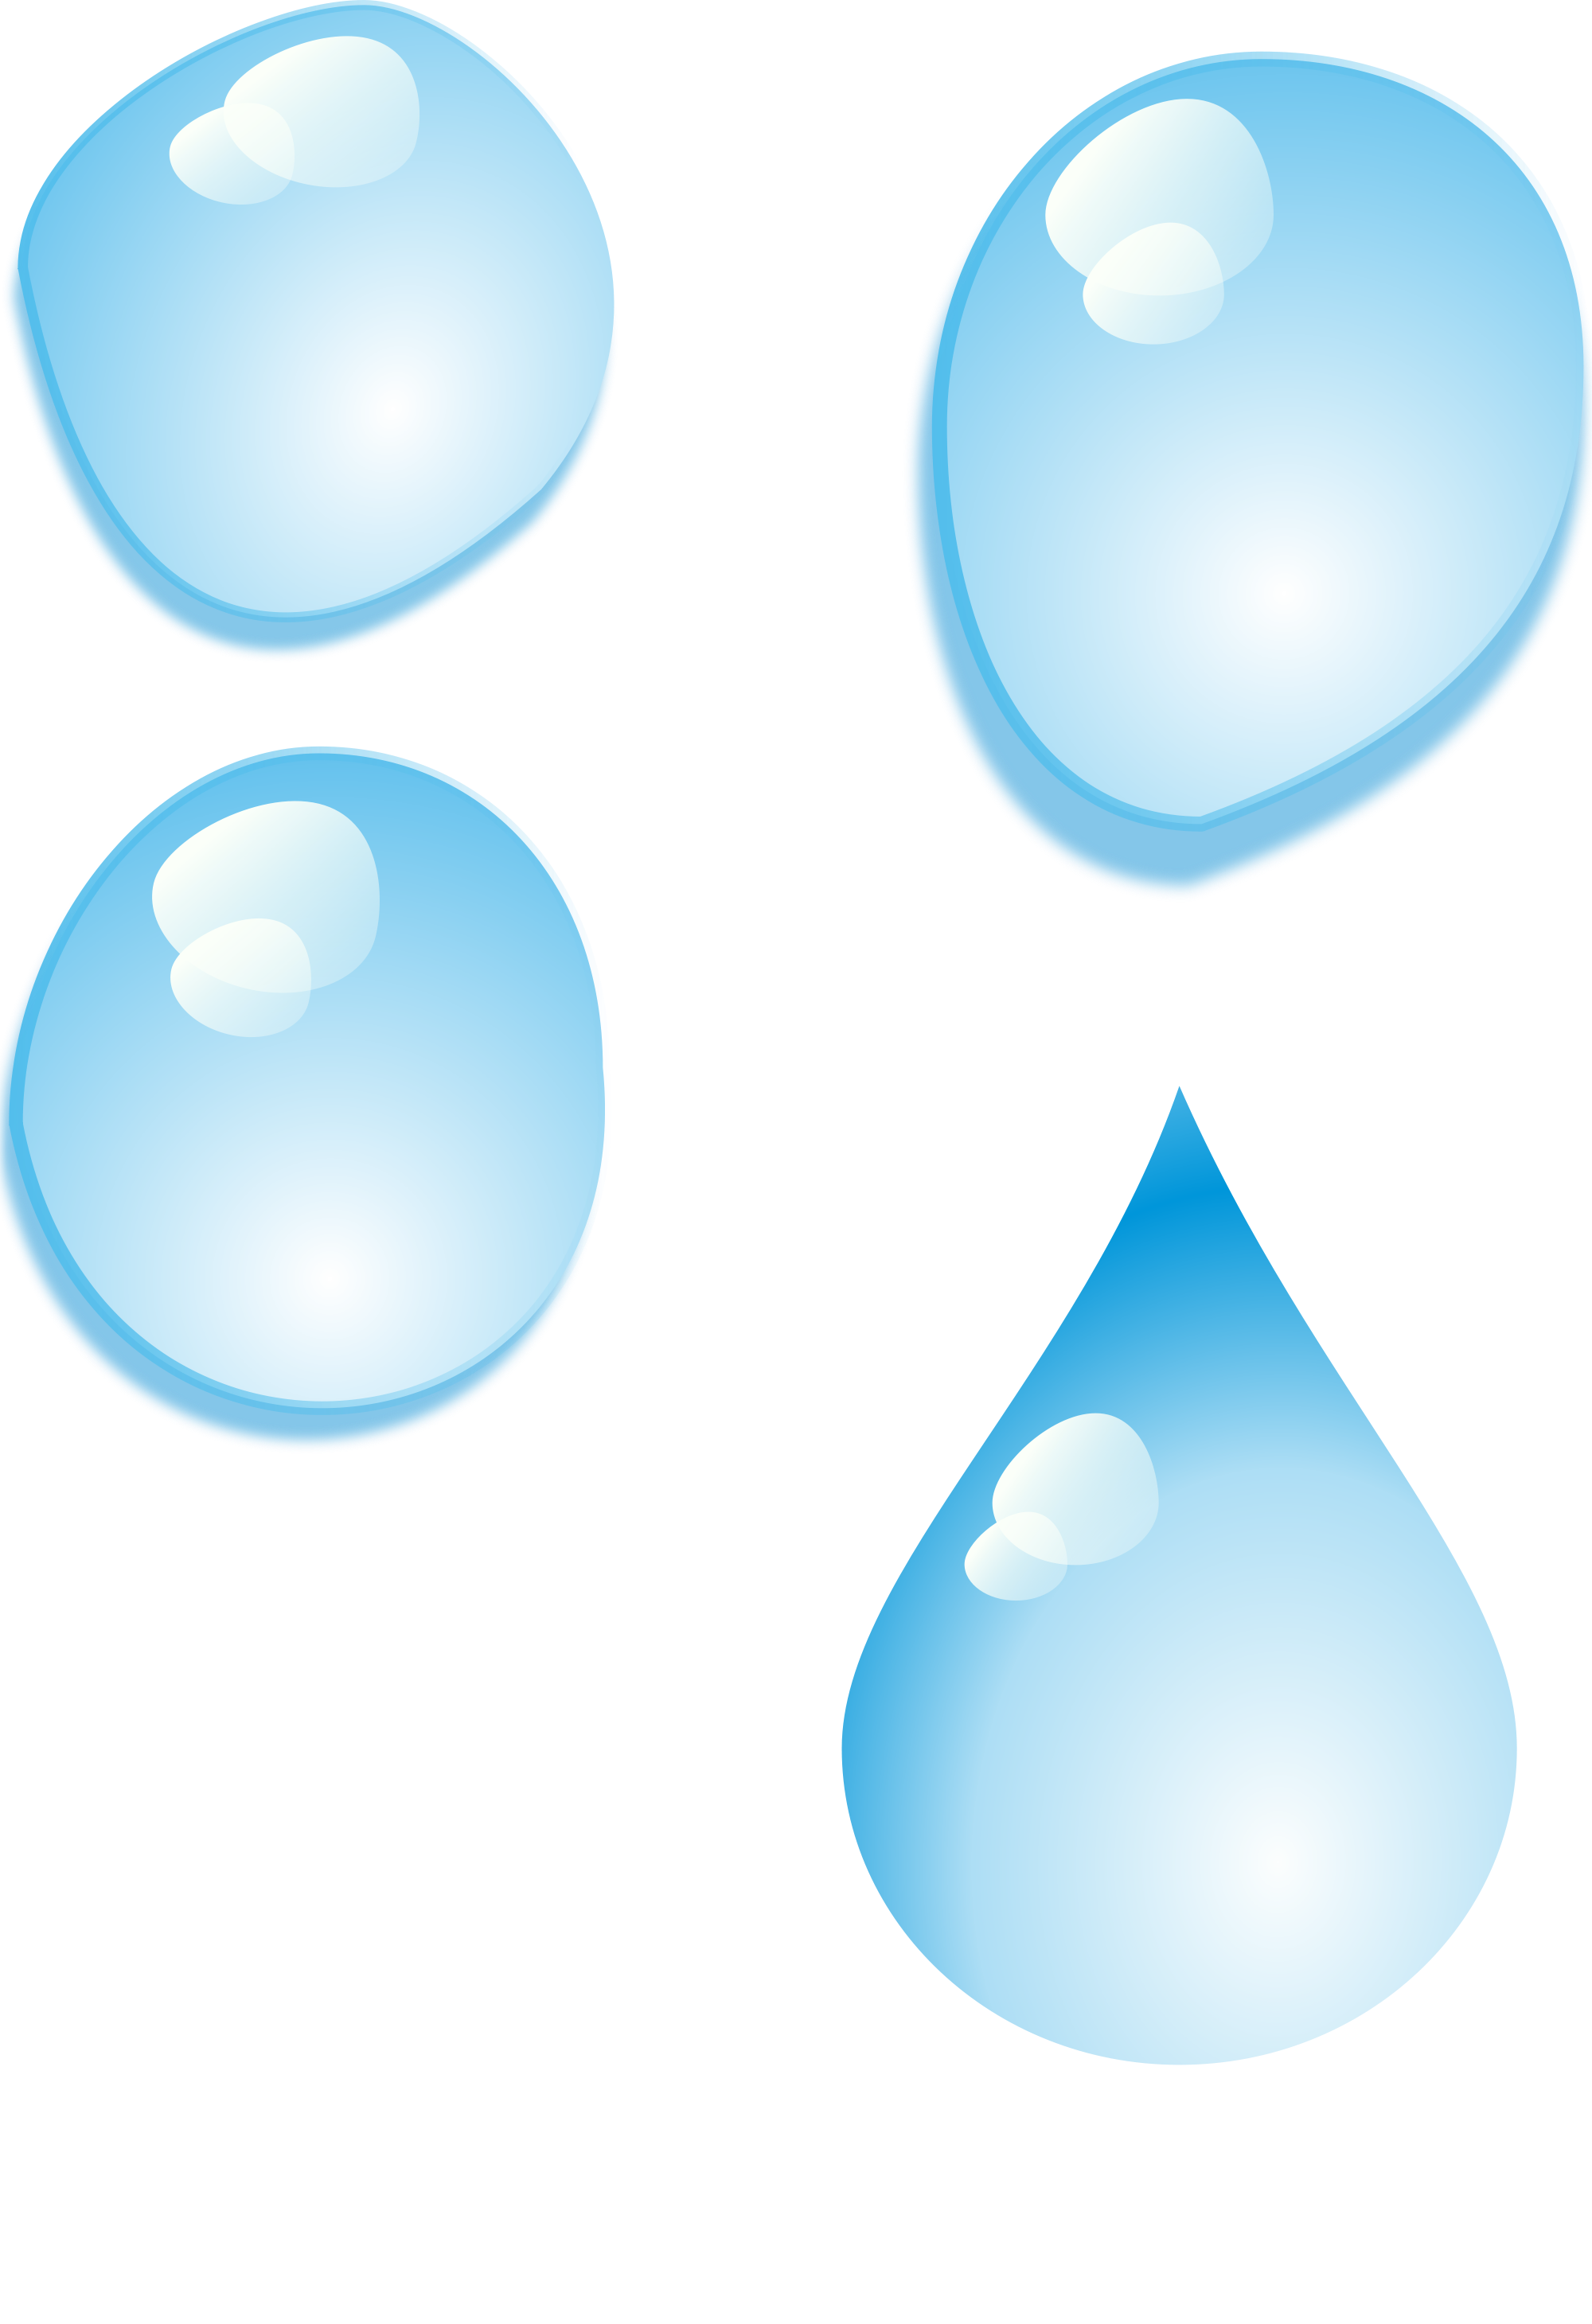 File:Rg1024 Set of water drops.svg - Wikimedia Commons